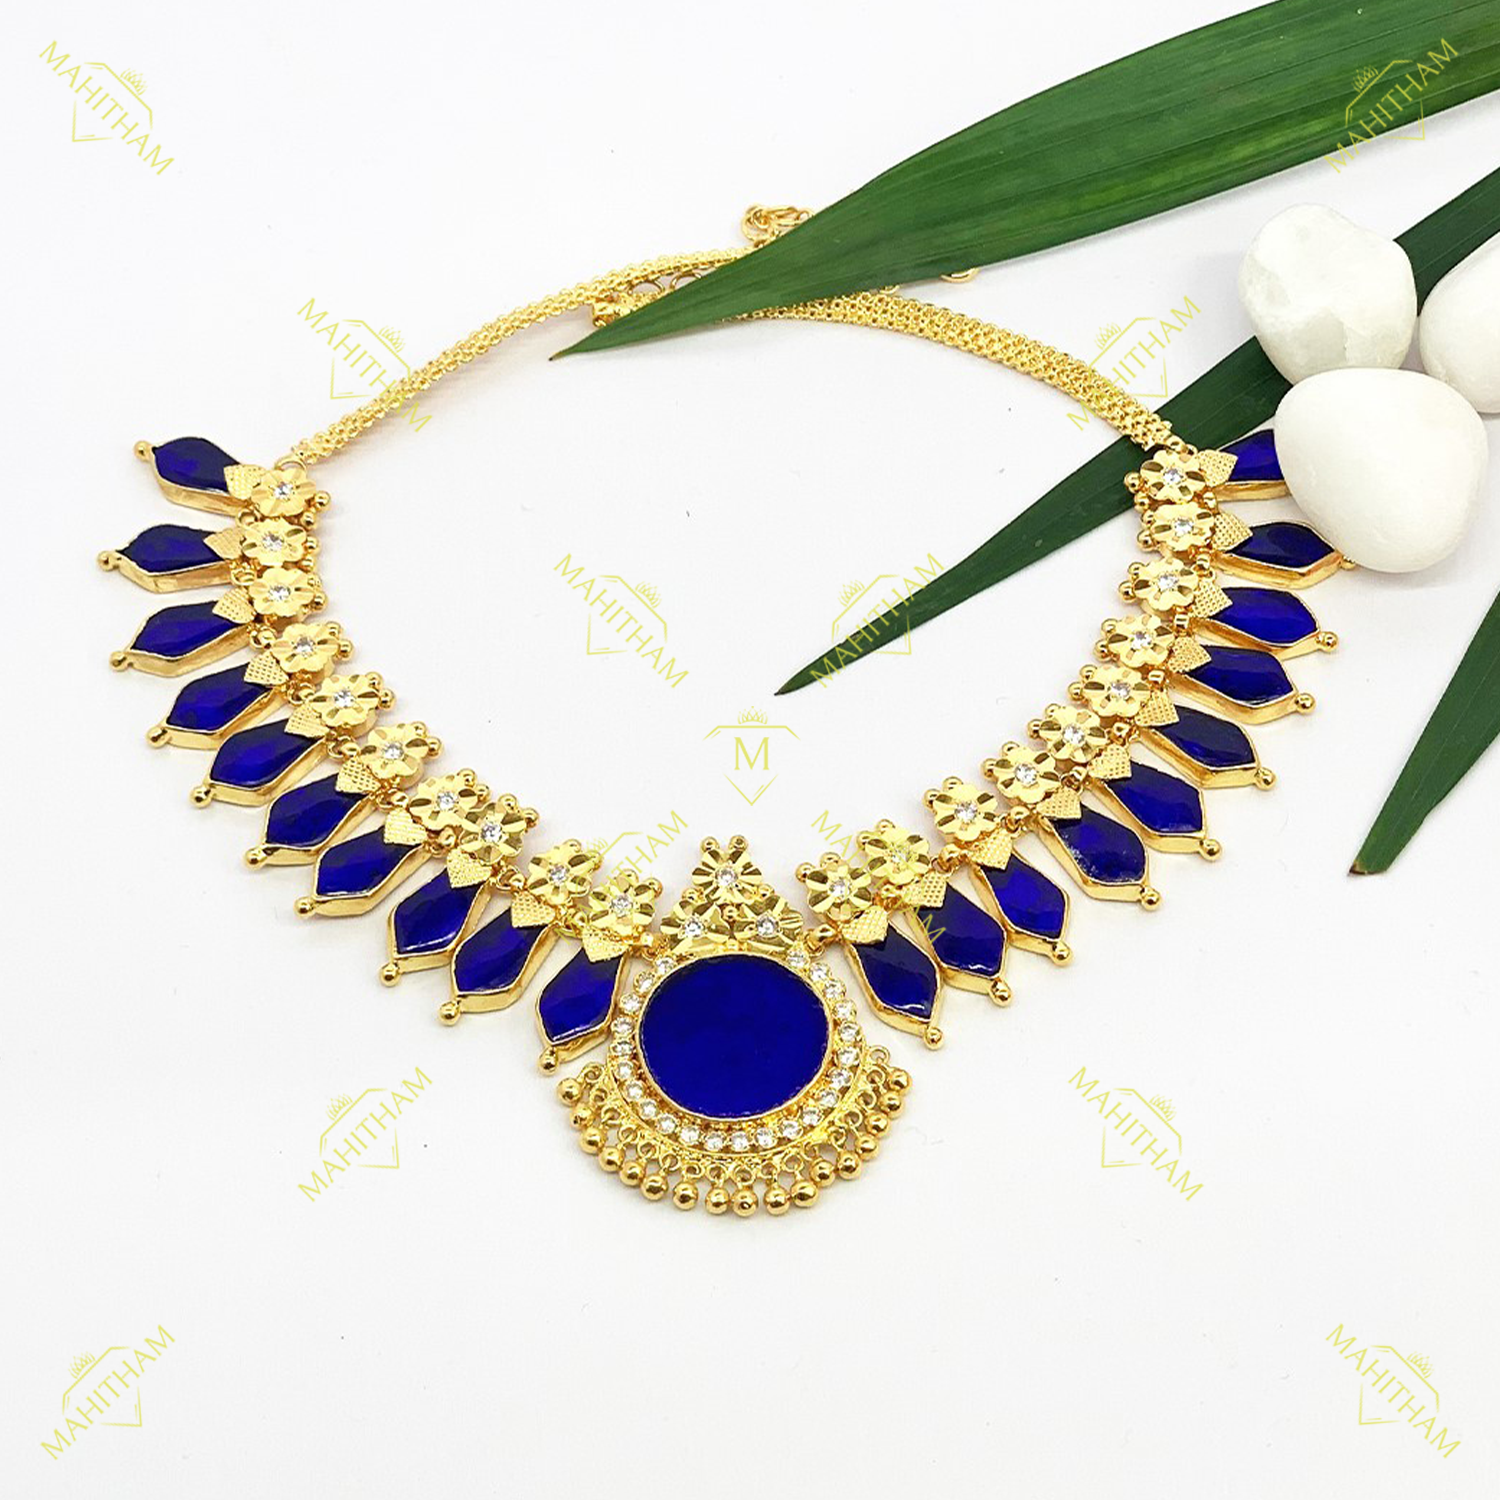 Gold Necklace with Blue Stones and Pearl Drops. | Blue stones jewelry, Gold  necklace designs, Blue stone necklace